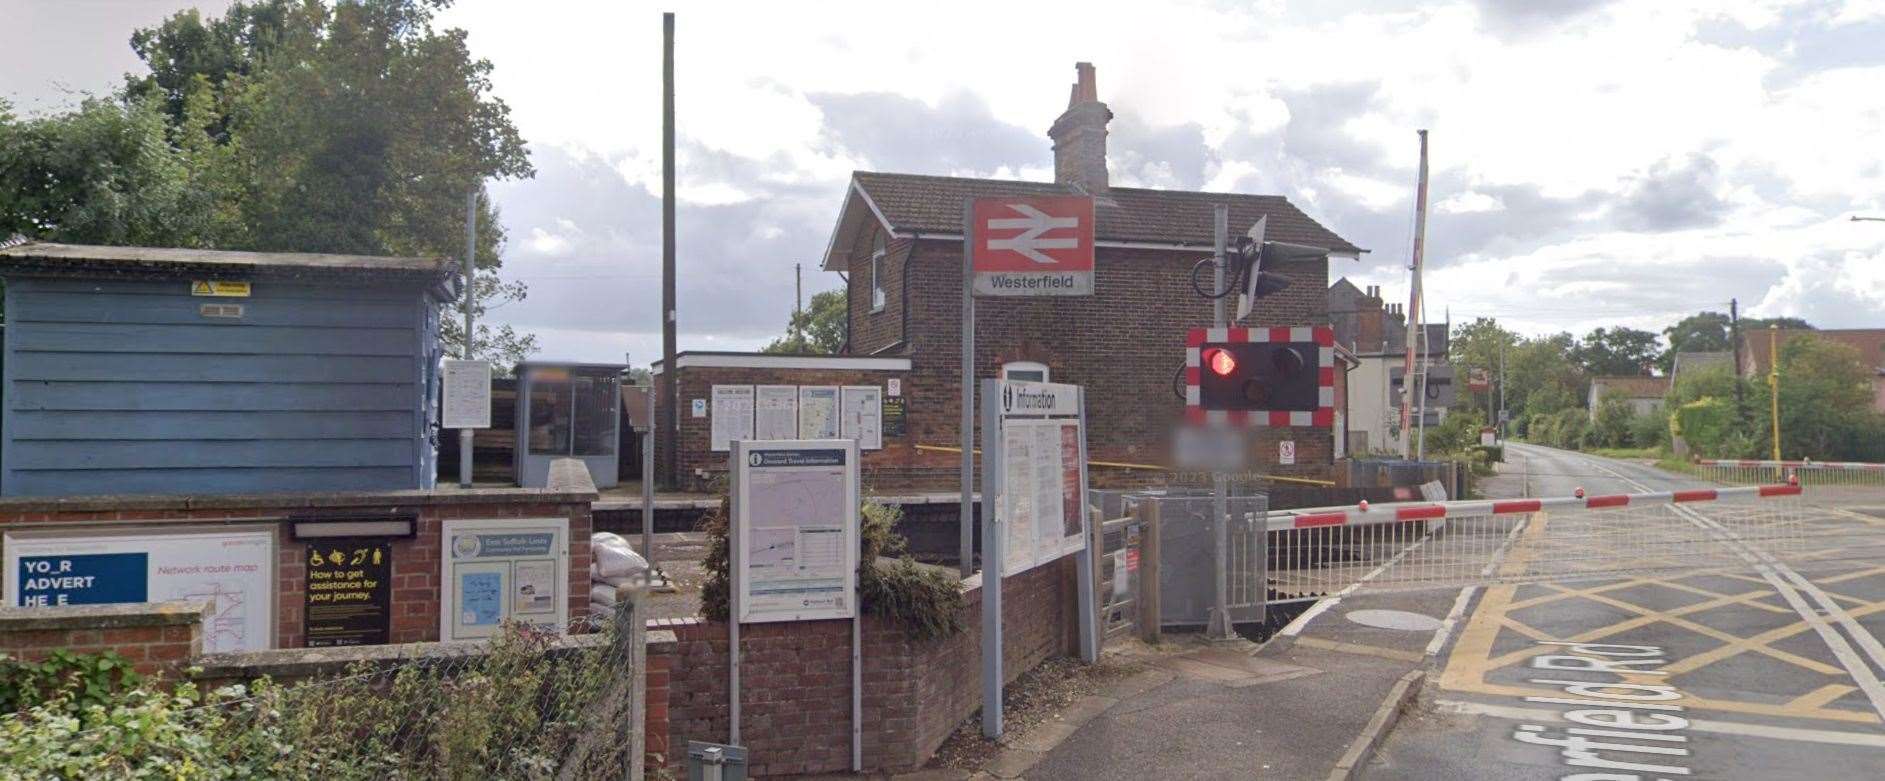 Westerfield is the fourth least used station in Suffolk, with 13,970 entries and exits in the last period. Picture: Google Maps